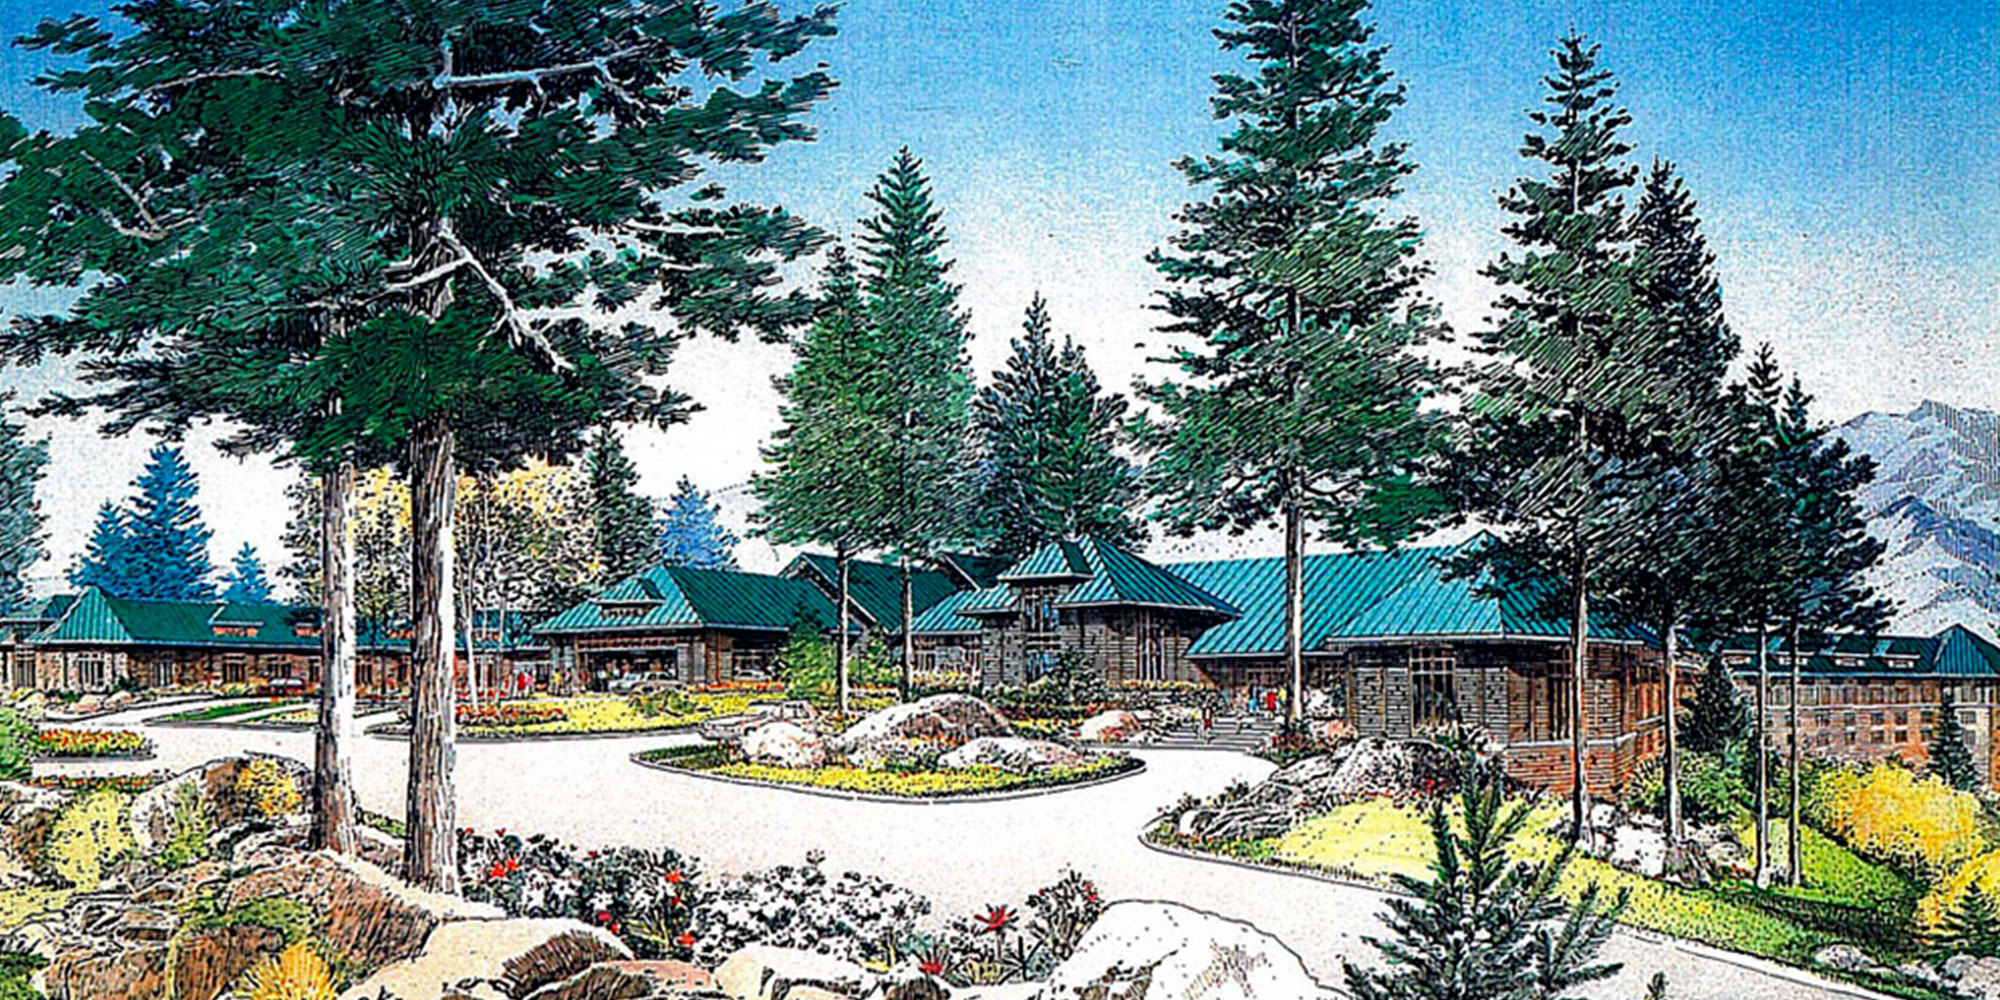 Castle Pines Hotel proposed front elevation